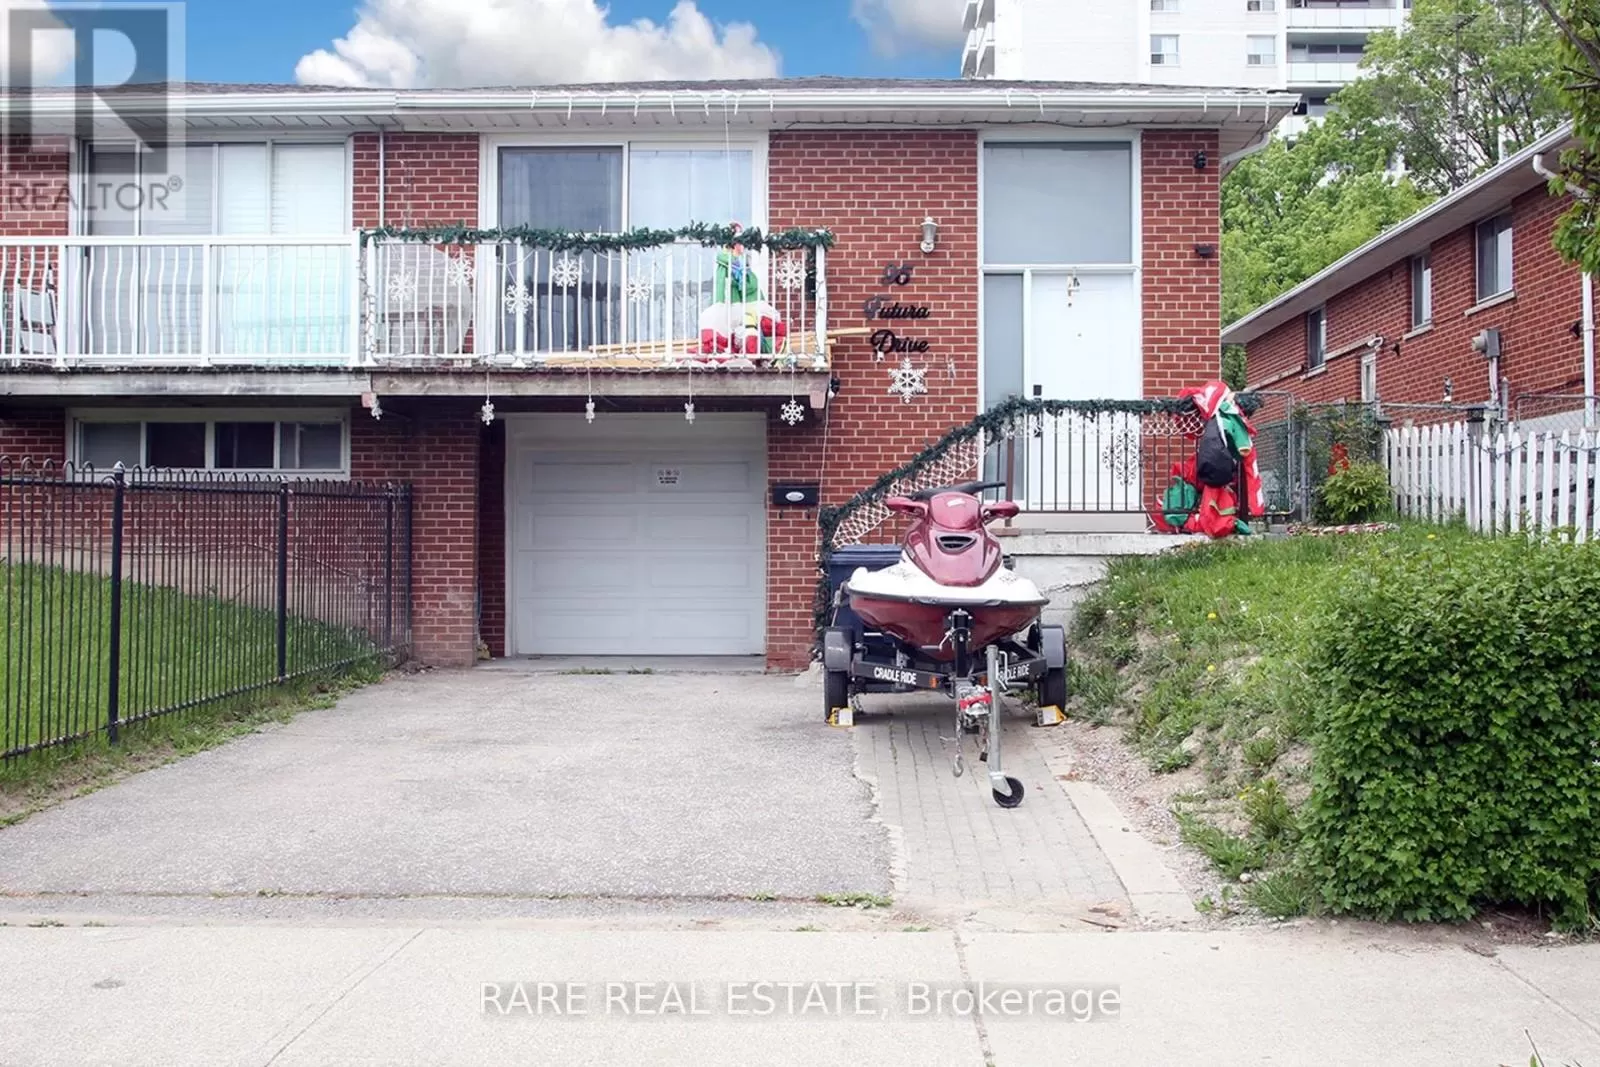 House for rent: Bsmt - 95 Futura Drive, Toronto, Ontario M3N 2L6